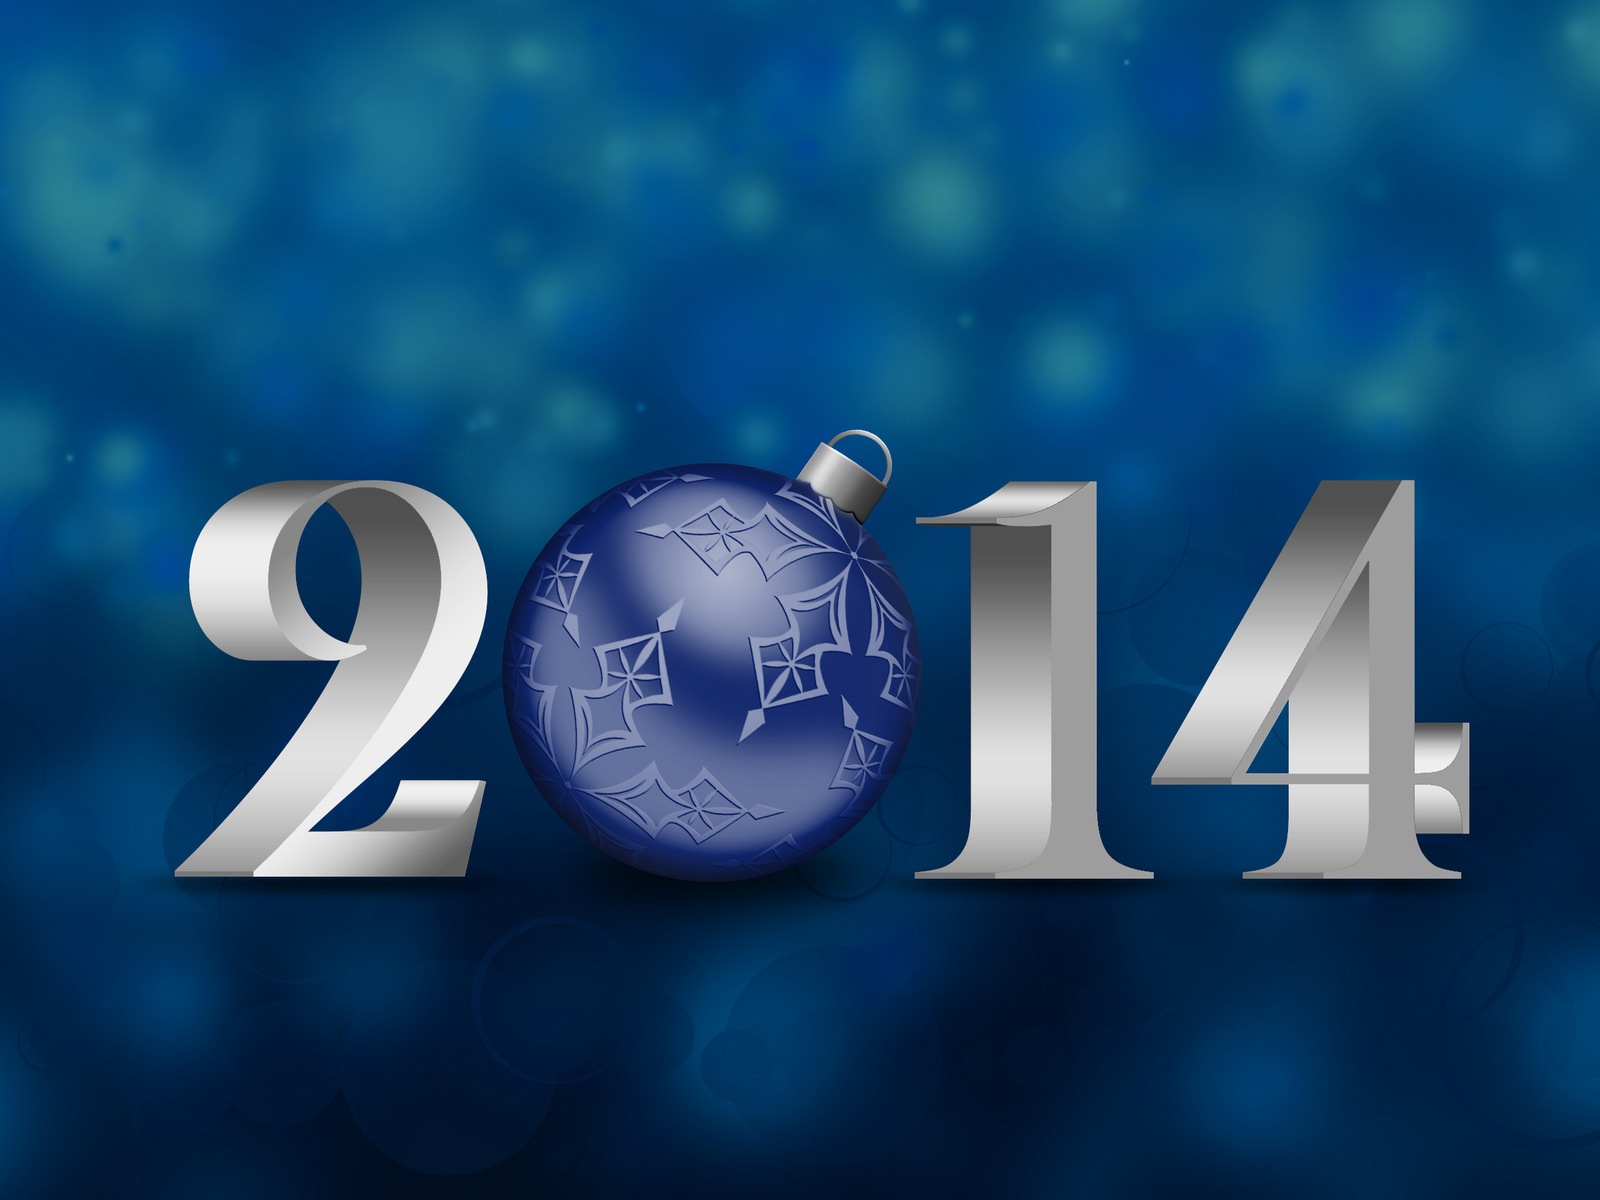 2014 New Year Theme HD Wallpapers (1) #5 - 1600x1200